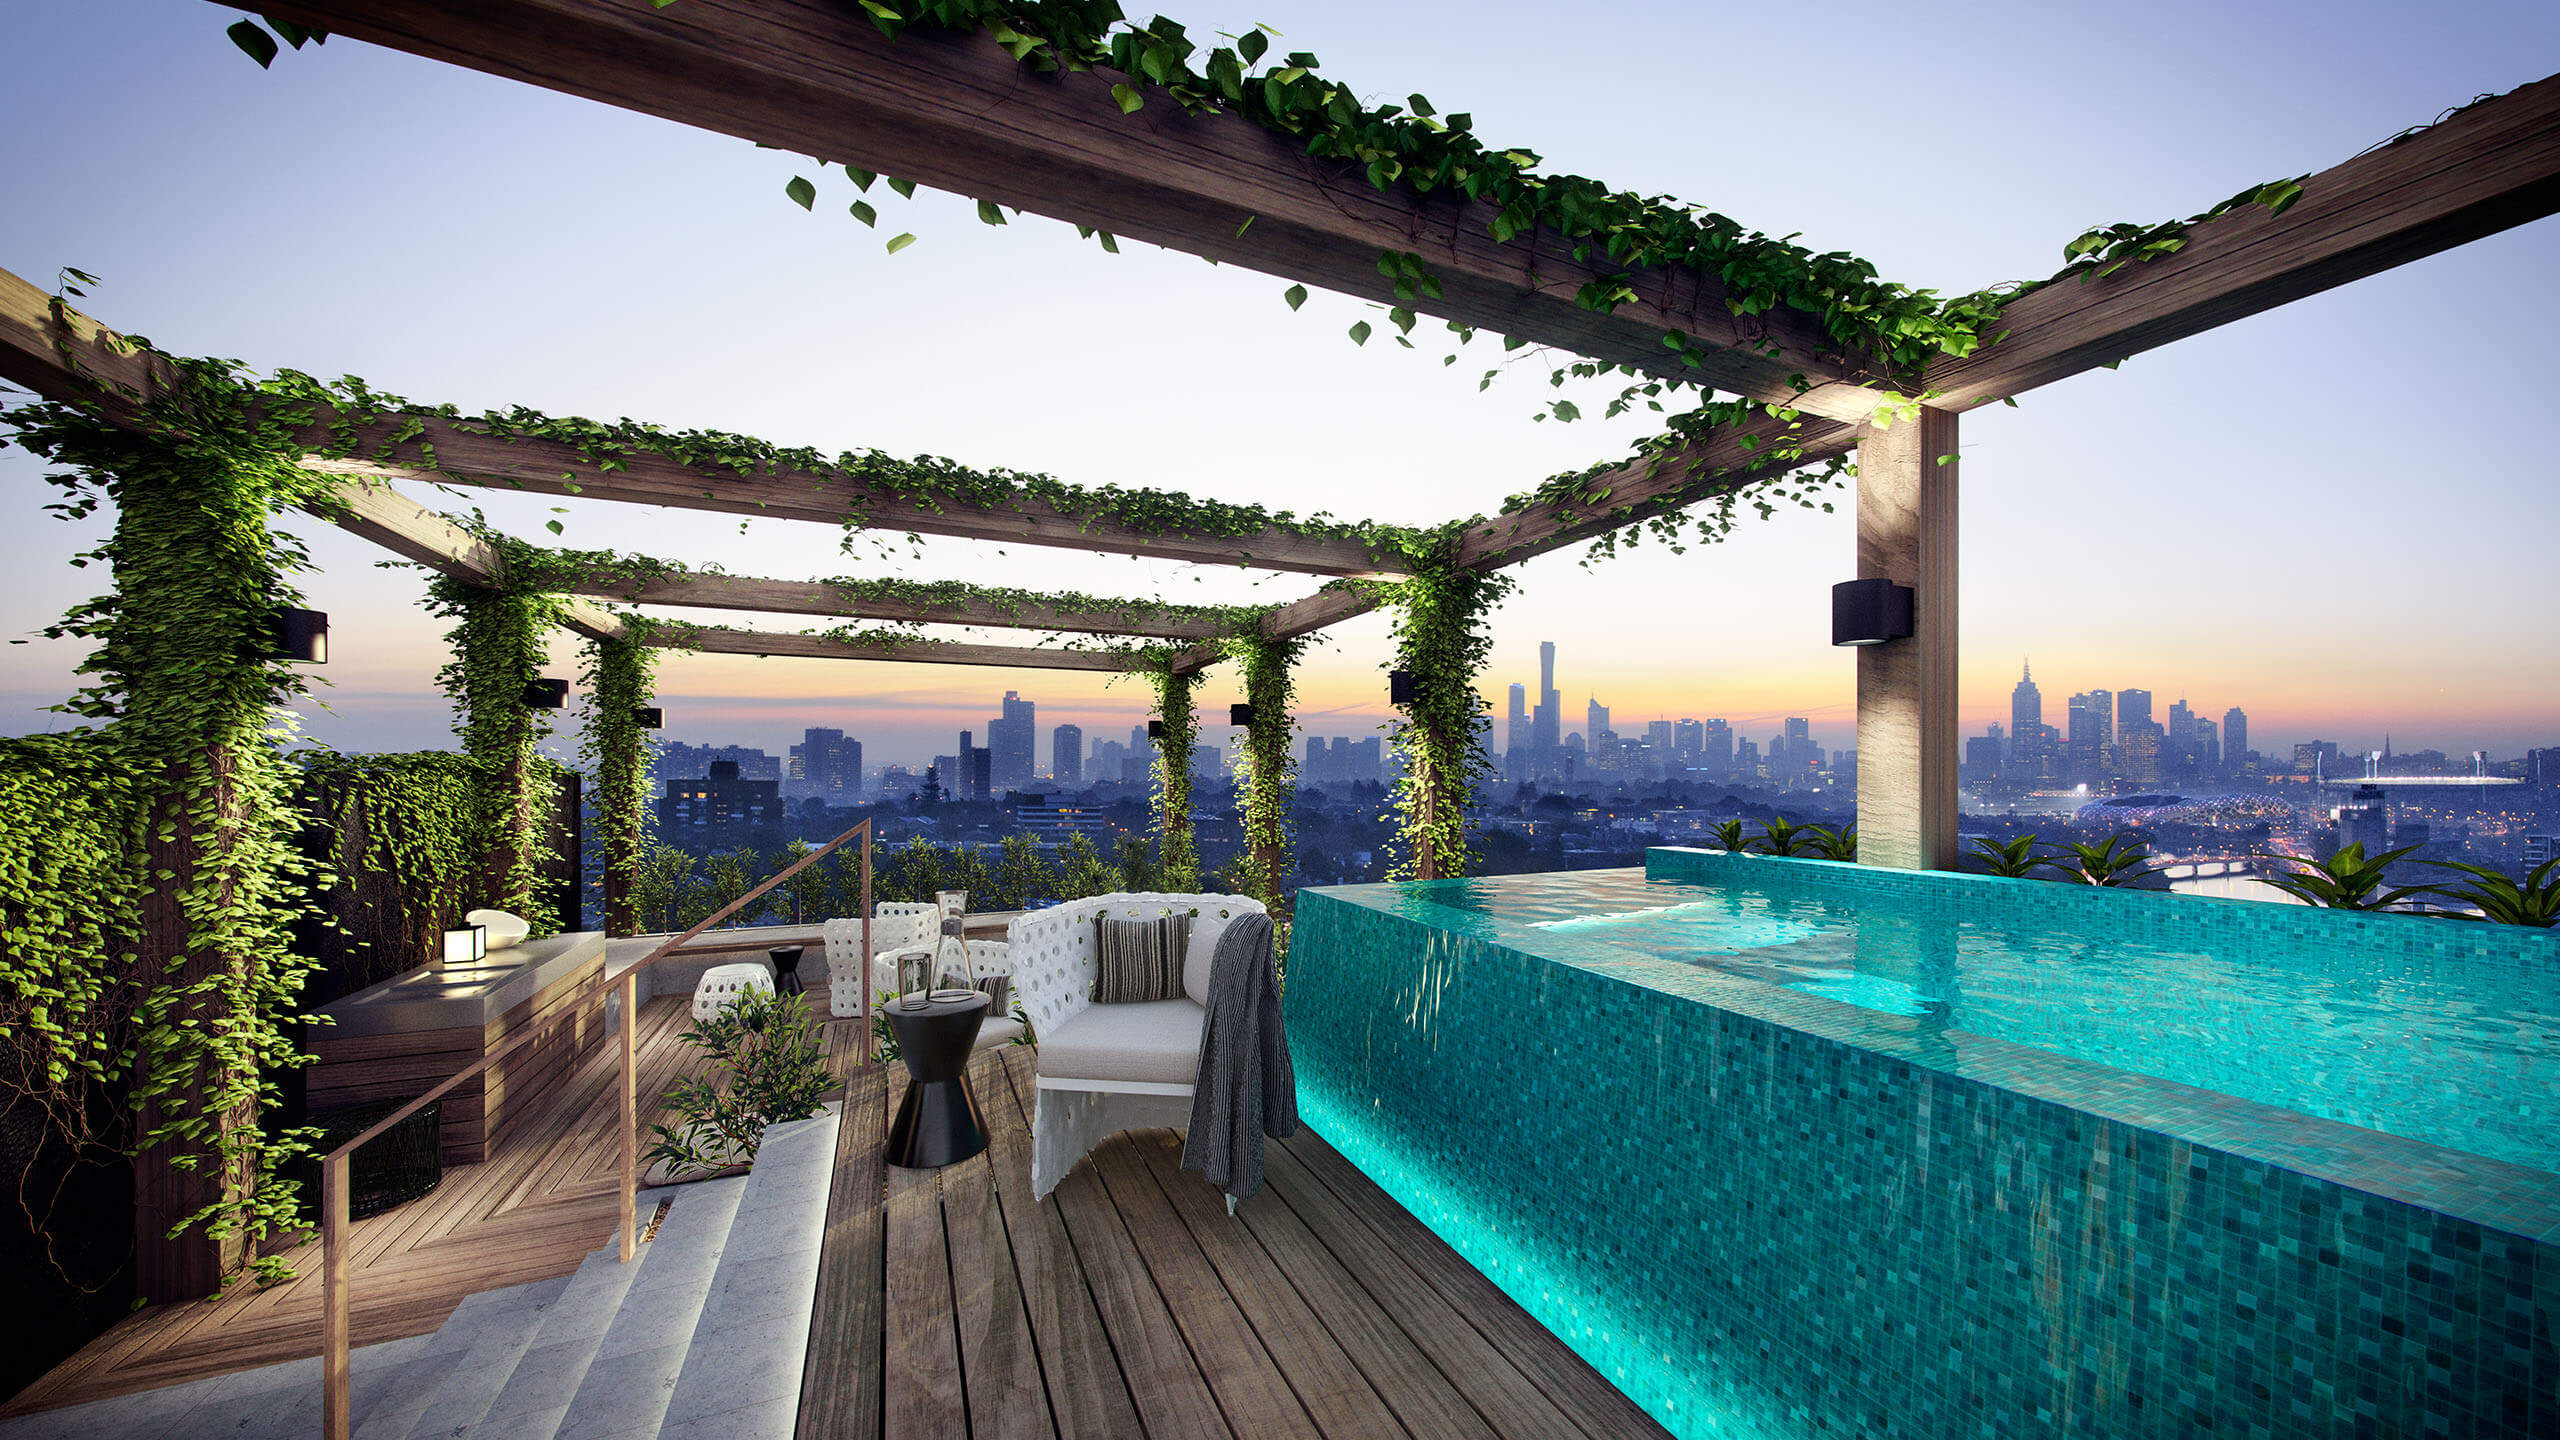 An outdoor swimming pool with a view of the city
